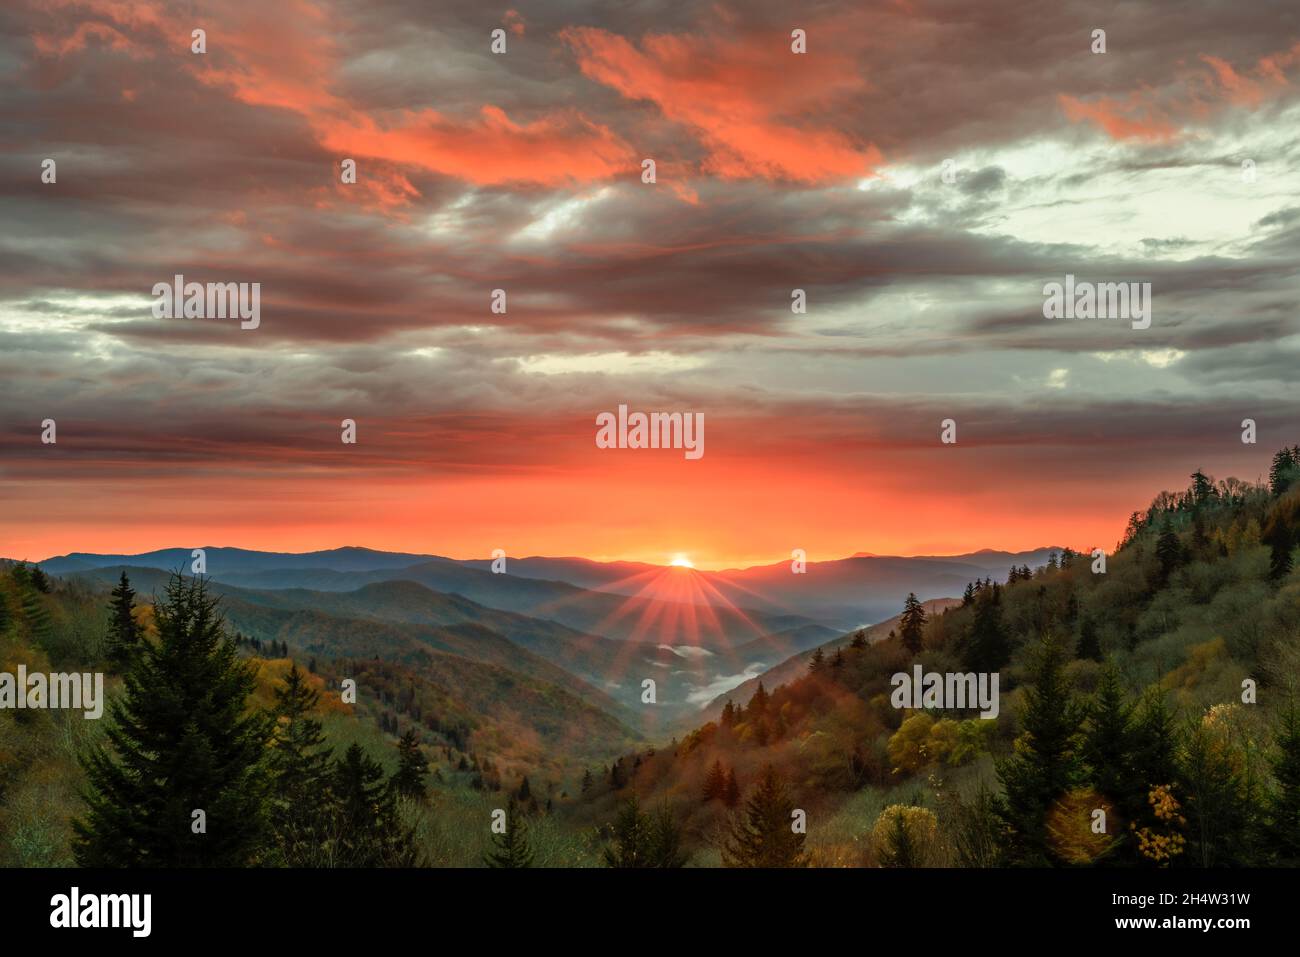 A dramatic autumn sunrise unfolds over the Oconaluftee Valley in Great Smoky Mountains National Park. Stock Photo